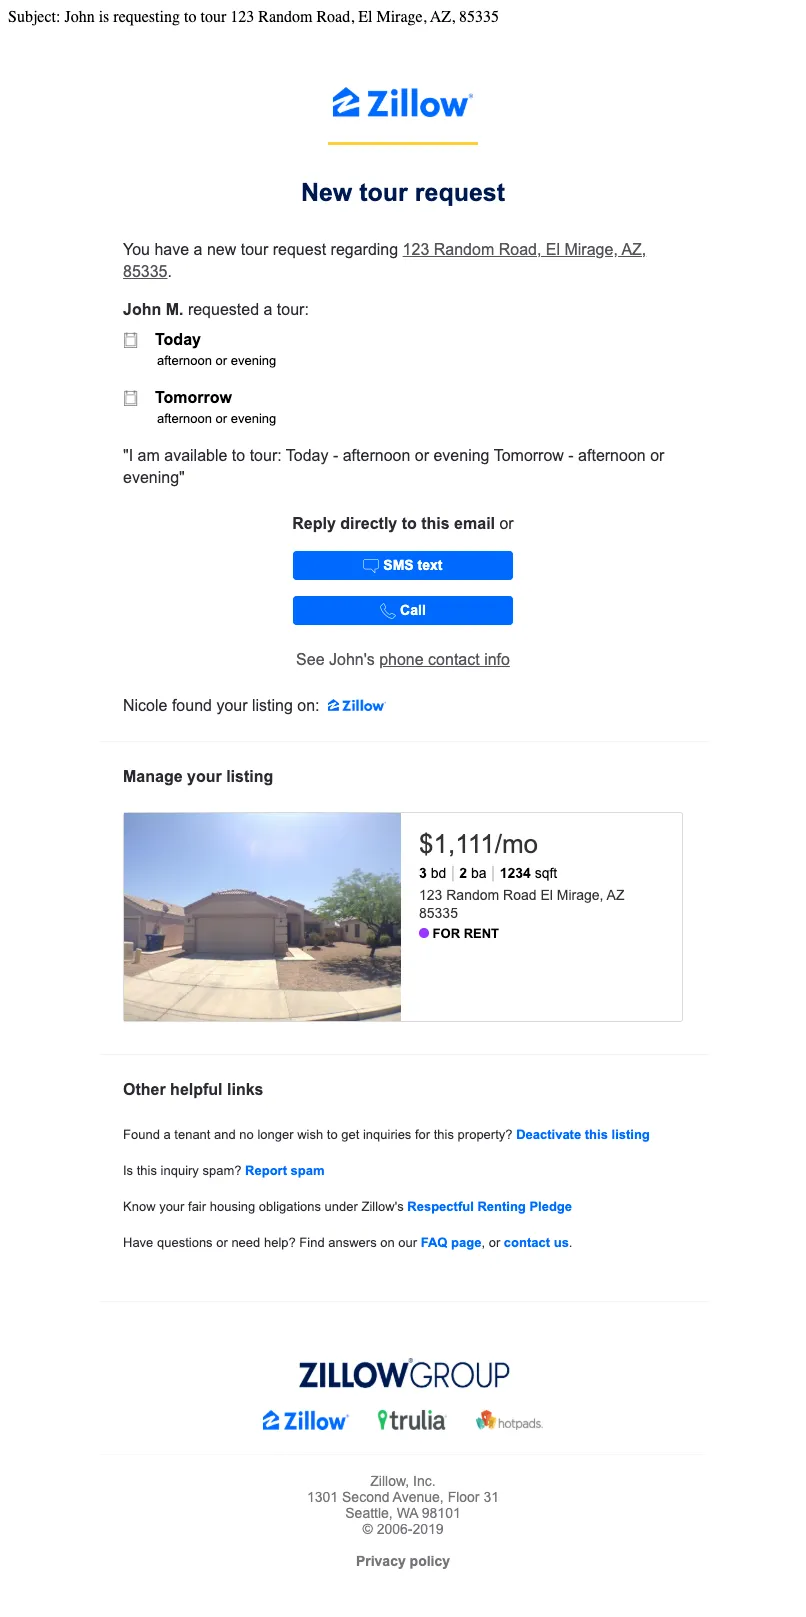 A screen capture of zillow email